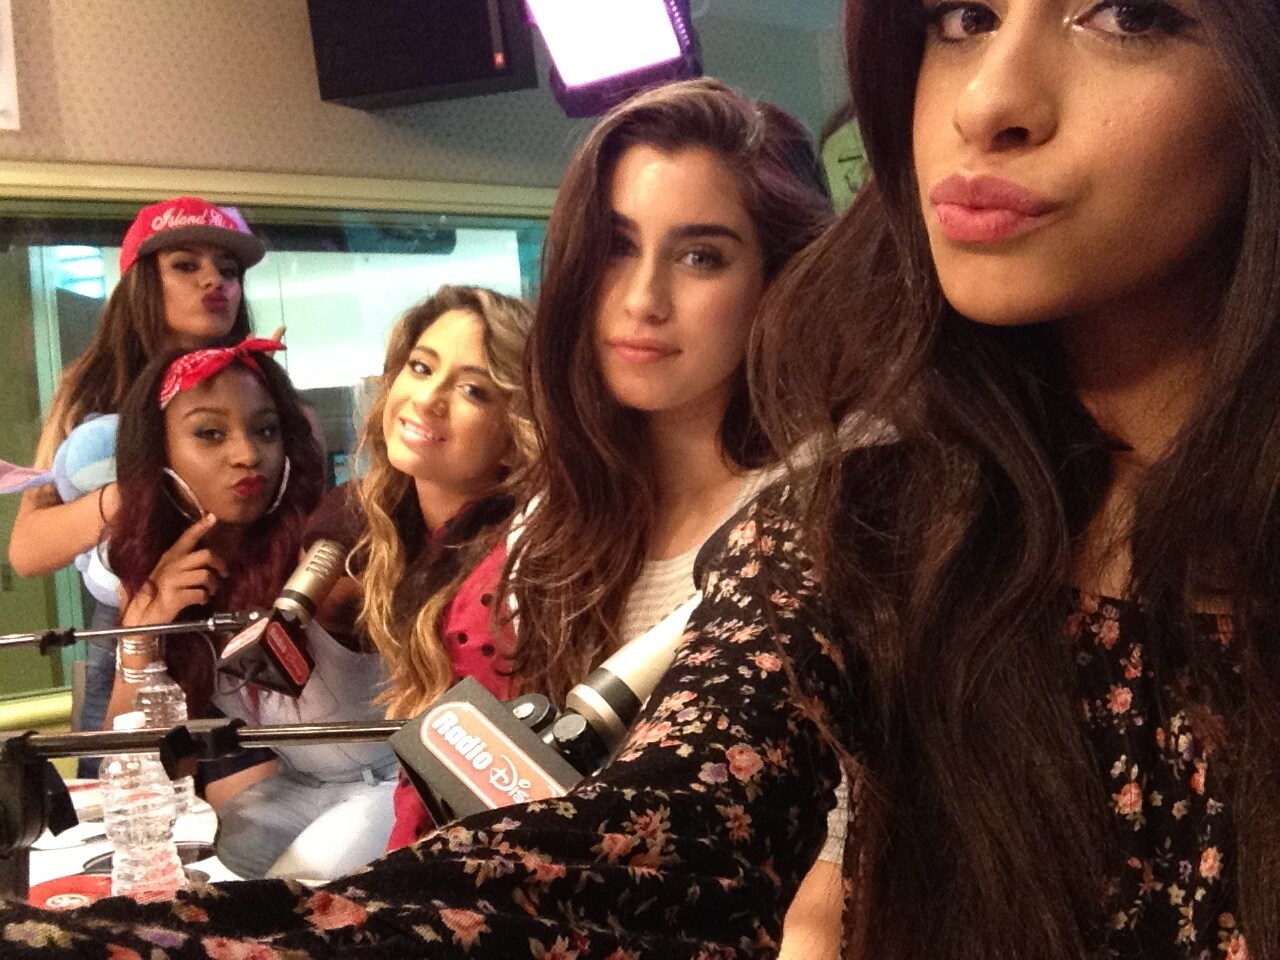 Special appearance by Fifth Harmony